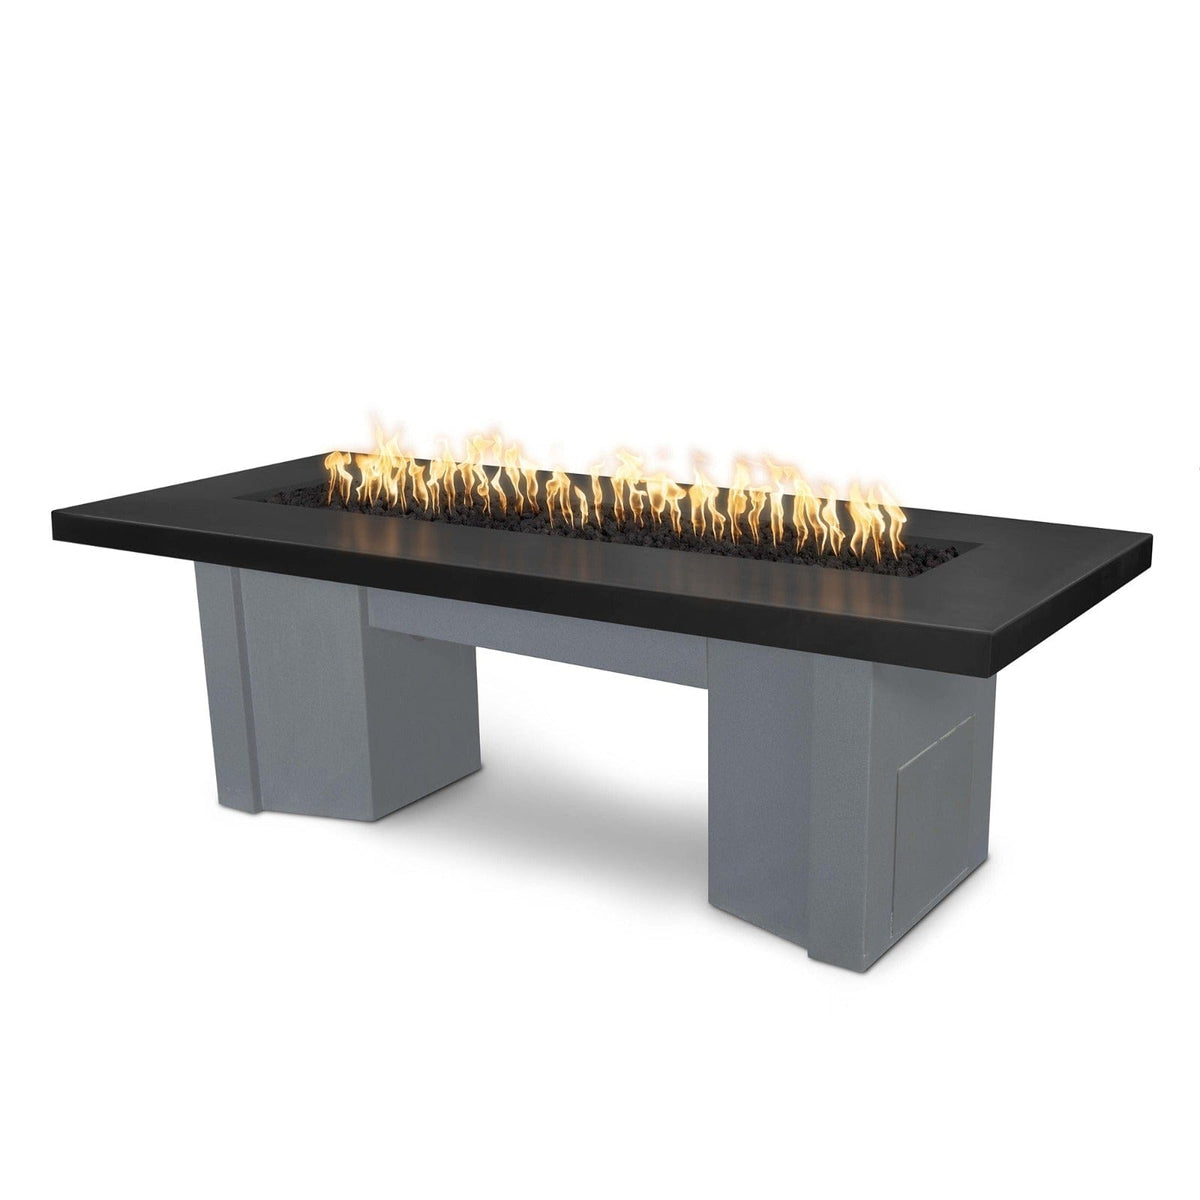 The Outdoor Plus Fire Features Black (-BLK) / Gray Powder Coated Steel (-GRY) The Outdoor Plus 60&quot; Alameda Fire Table Smooth Concrete in Liquid Propane - Flame Sense System with Push Button Spark Igniter / OPT-ALMGFRC60FSEN-LP